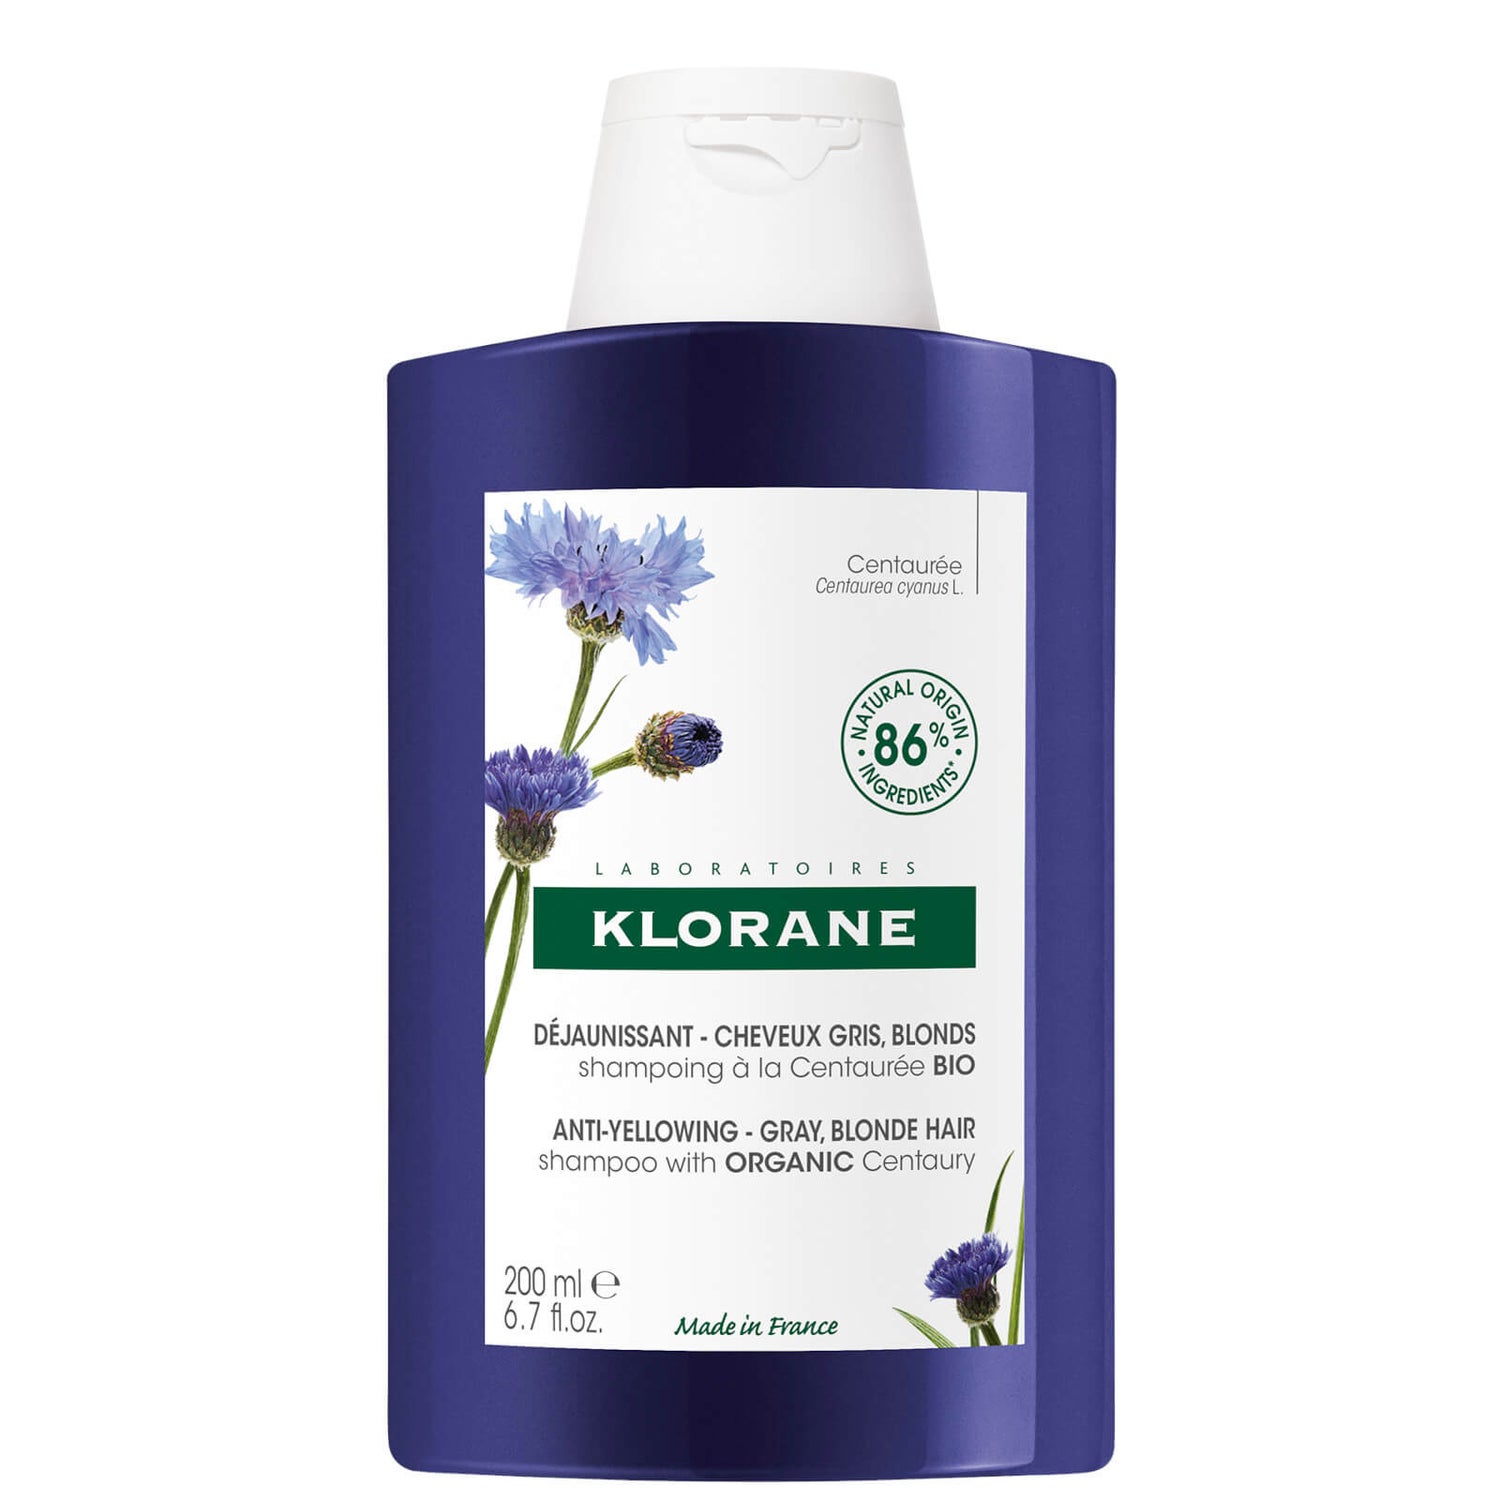 KLORANE Anti-yellowing Shampoo with Centaury for White and Grey Hair 200 ml